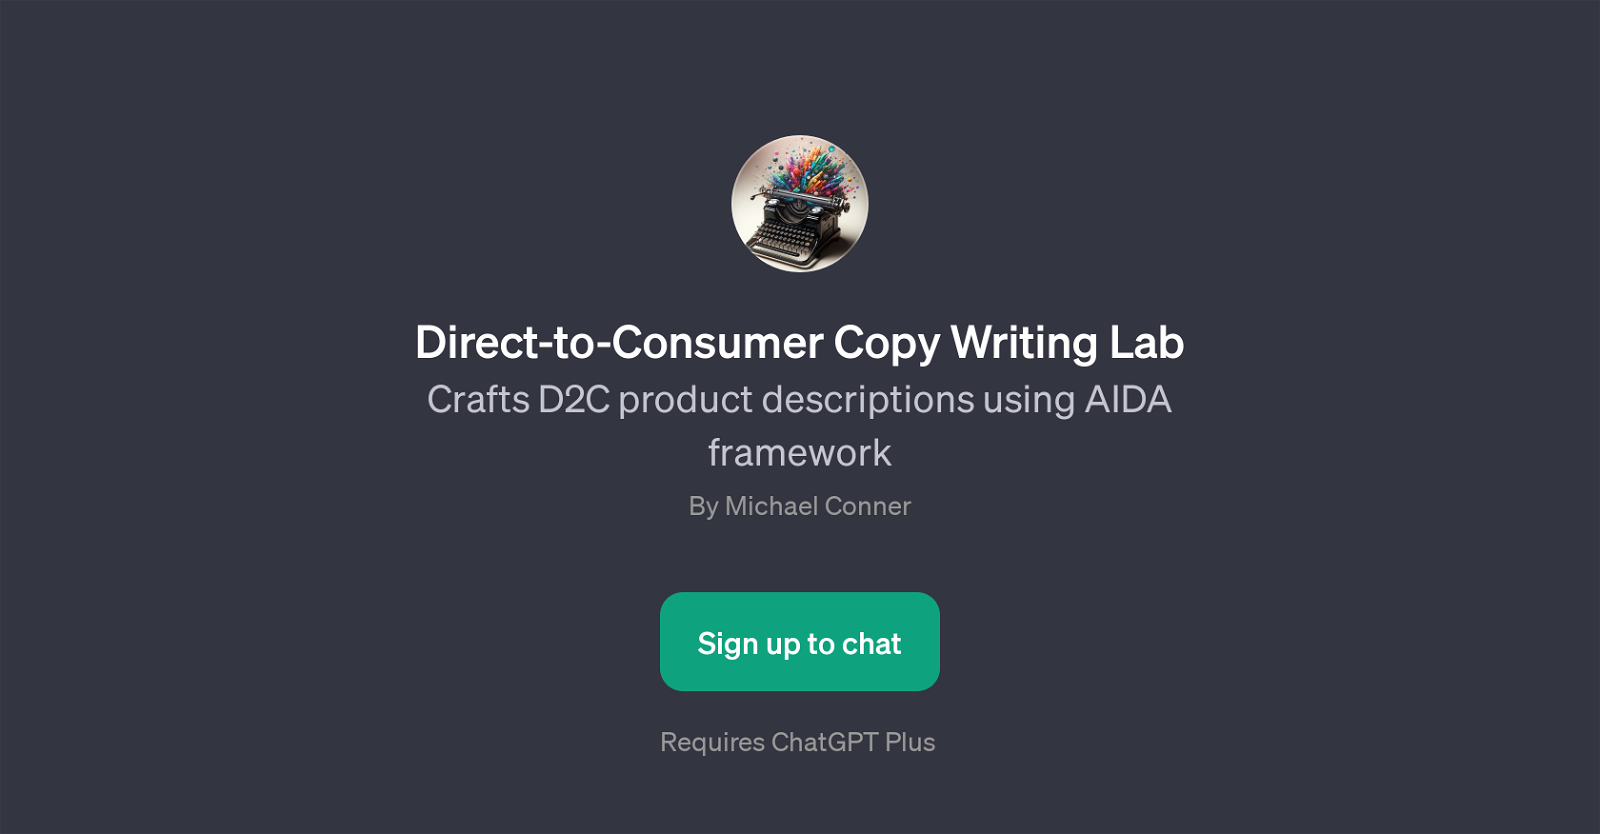 Direct-to-Consumer Copy Writing Lab website